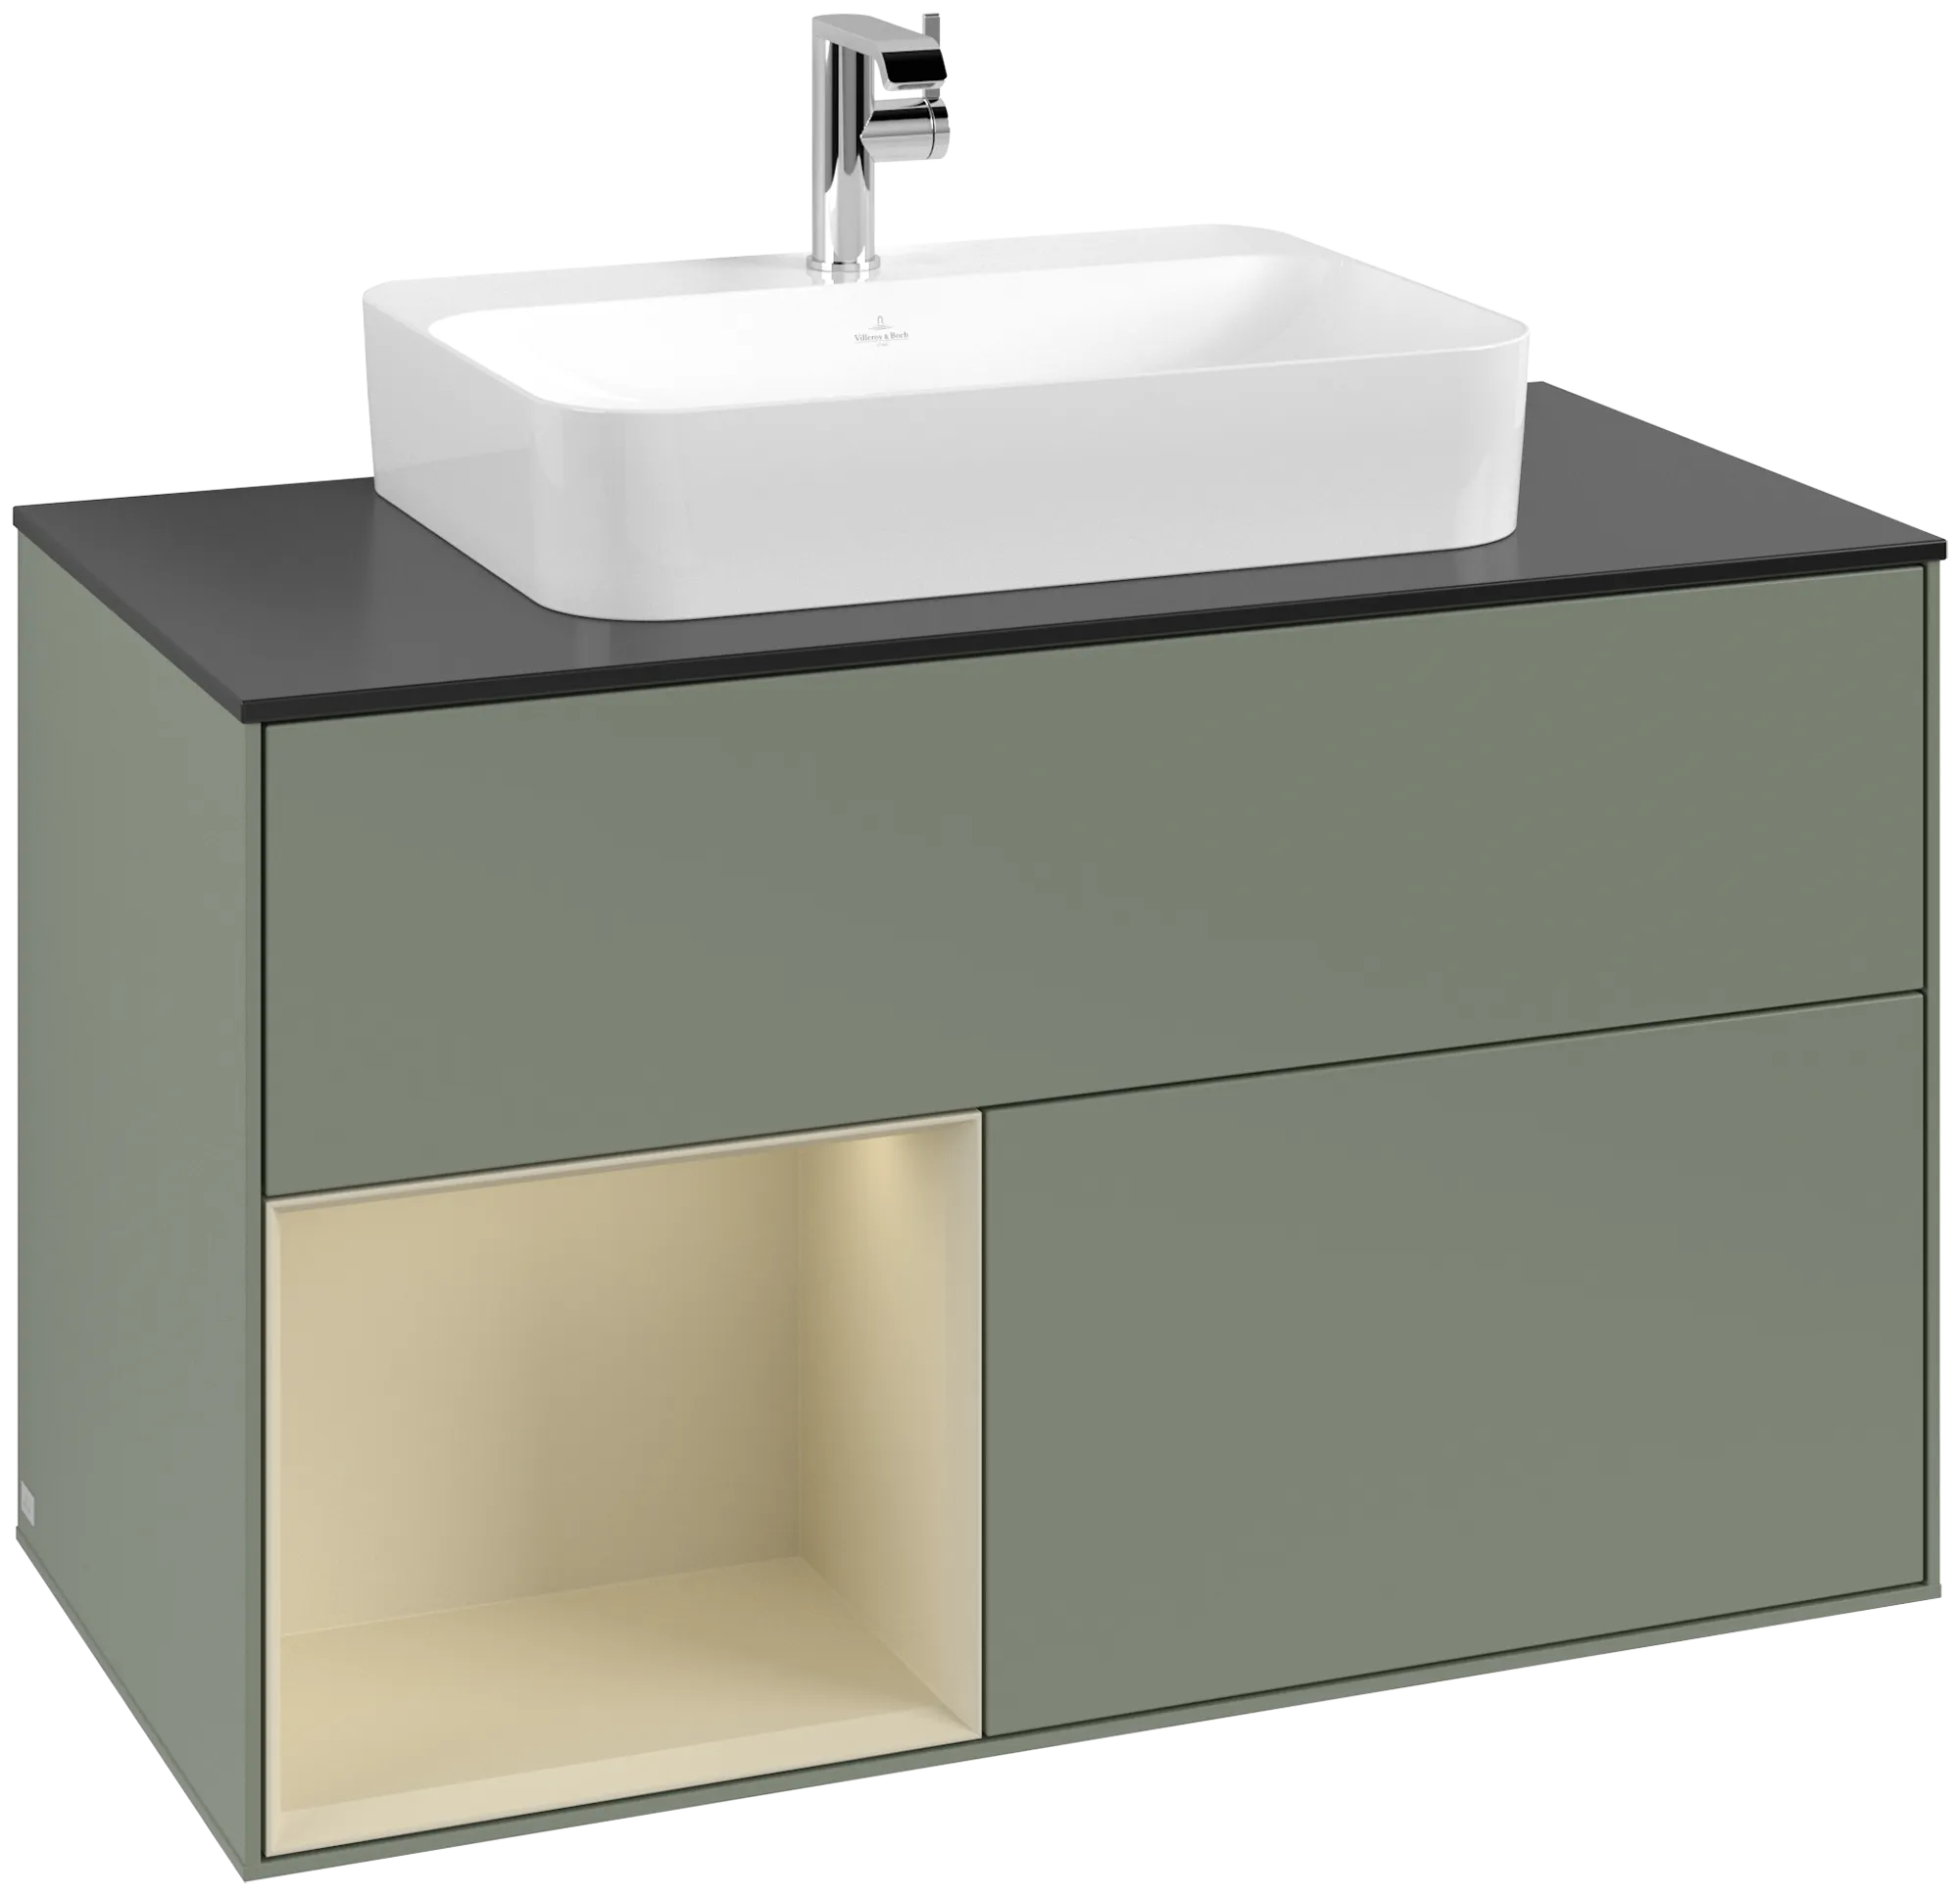 Picture of VILLEROY BOCH Finion Vanity unit, with lighting, 2 pull-out compartments, 1000 x 603 x 501 mm, Olive Matt Lacquer / Silk Grey Matt Lacquer / Glass Black Matt #G362HJGM